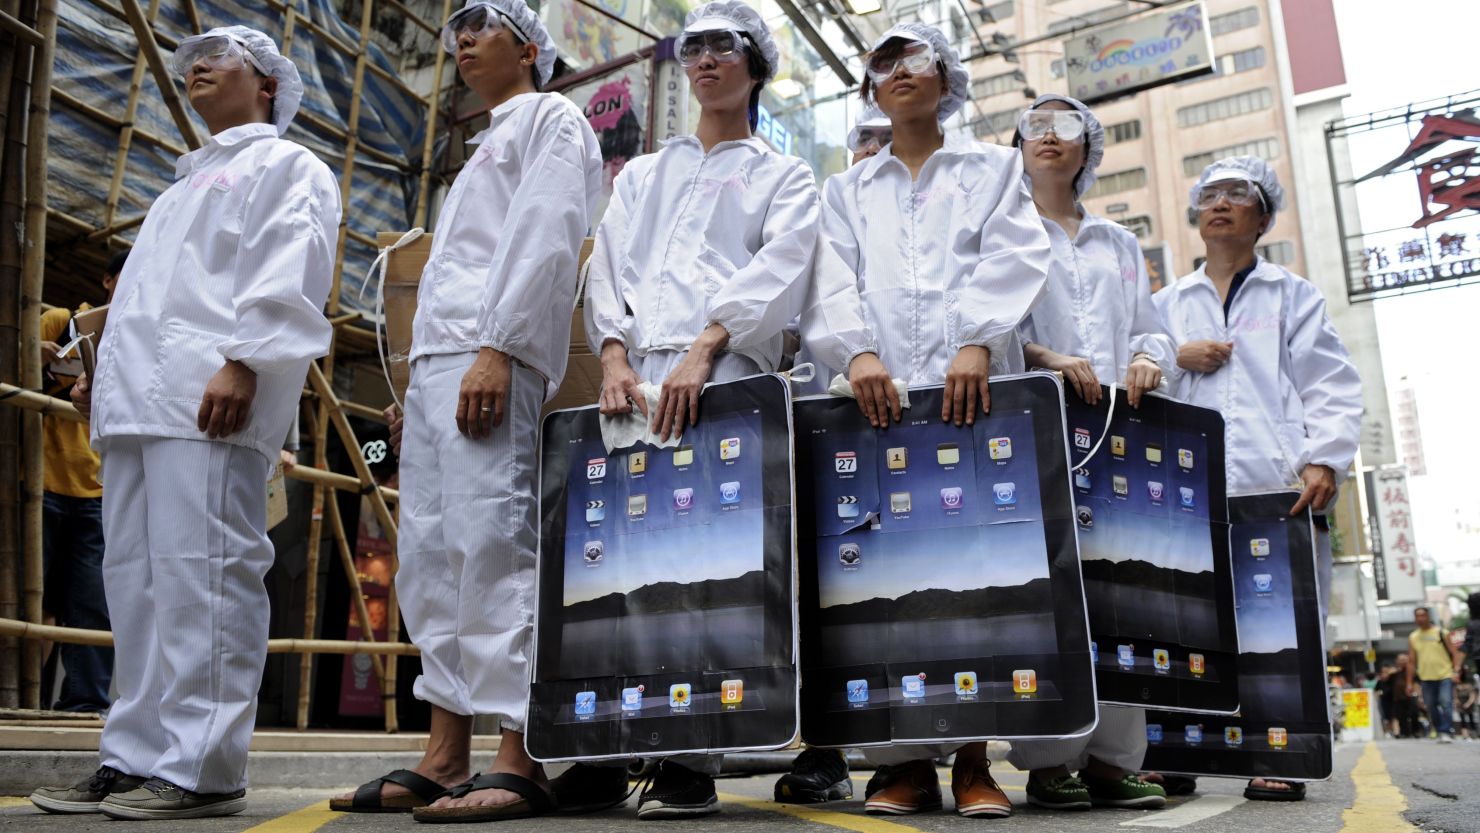 People stage a protest against Foxconn, which manufactures Apple products in mainland China, in May 2011 in Hong Kong. 